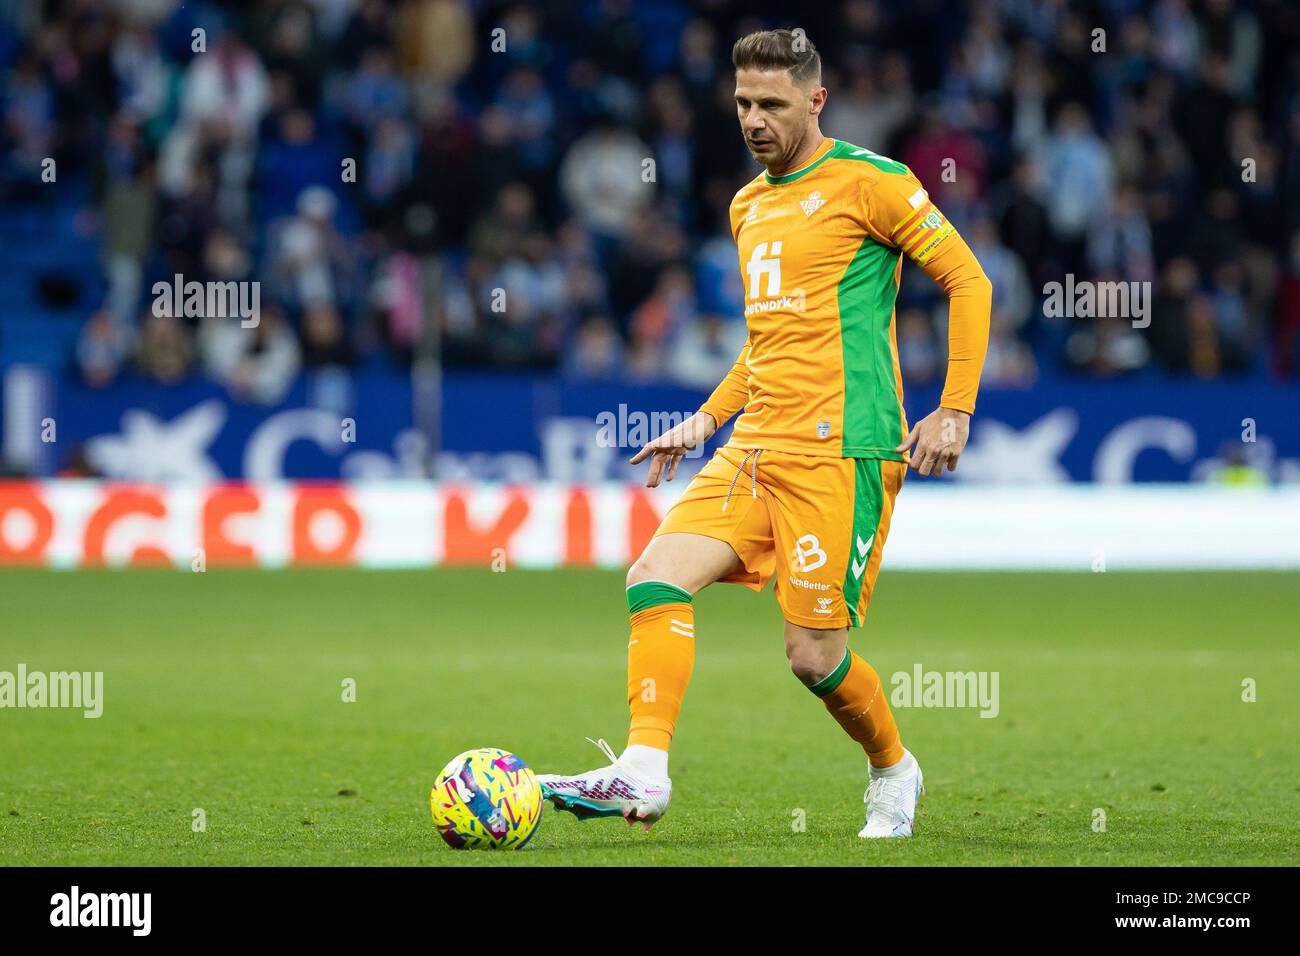 Joaquin of Real Betis Balompie during the Liga match between RCD Espanyol and Real Betis at RCDE Stadium in Cornella, Spain. Stock Photo